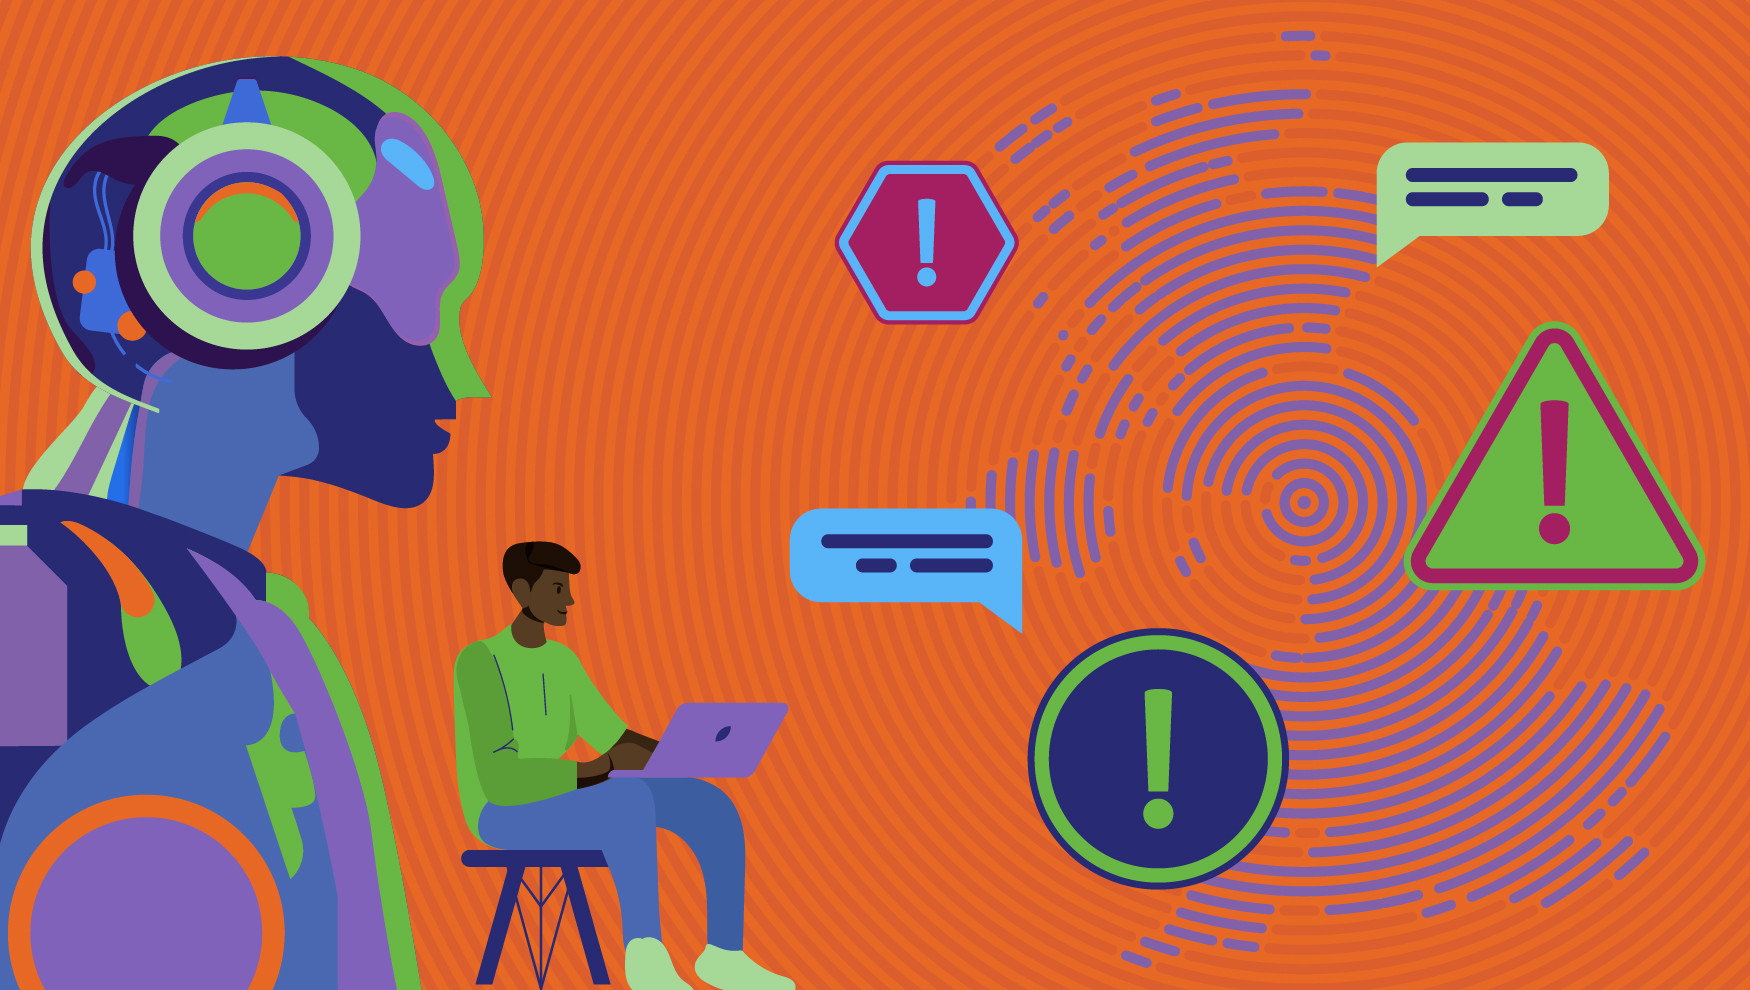 Illustration of a robot with gears in its brain standing over a human who types on a laptop. Warning signs are on the right with a fingerprint background.